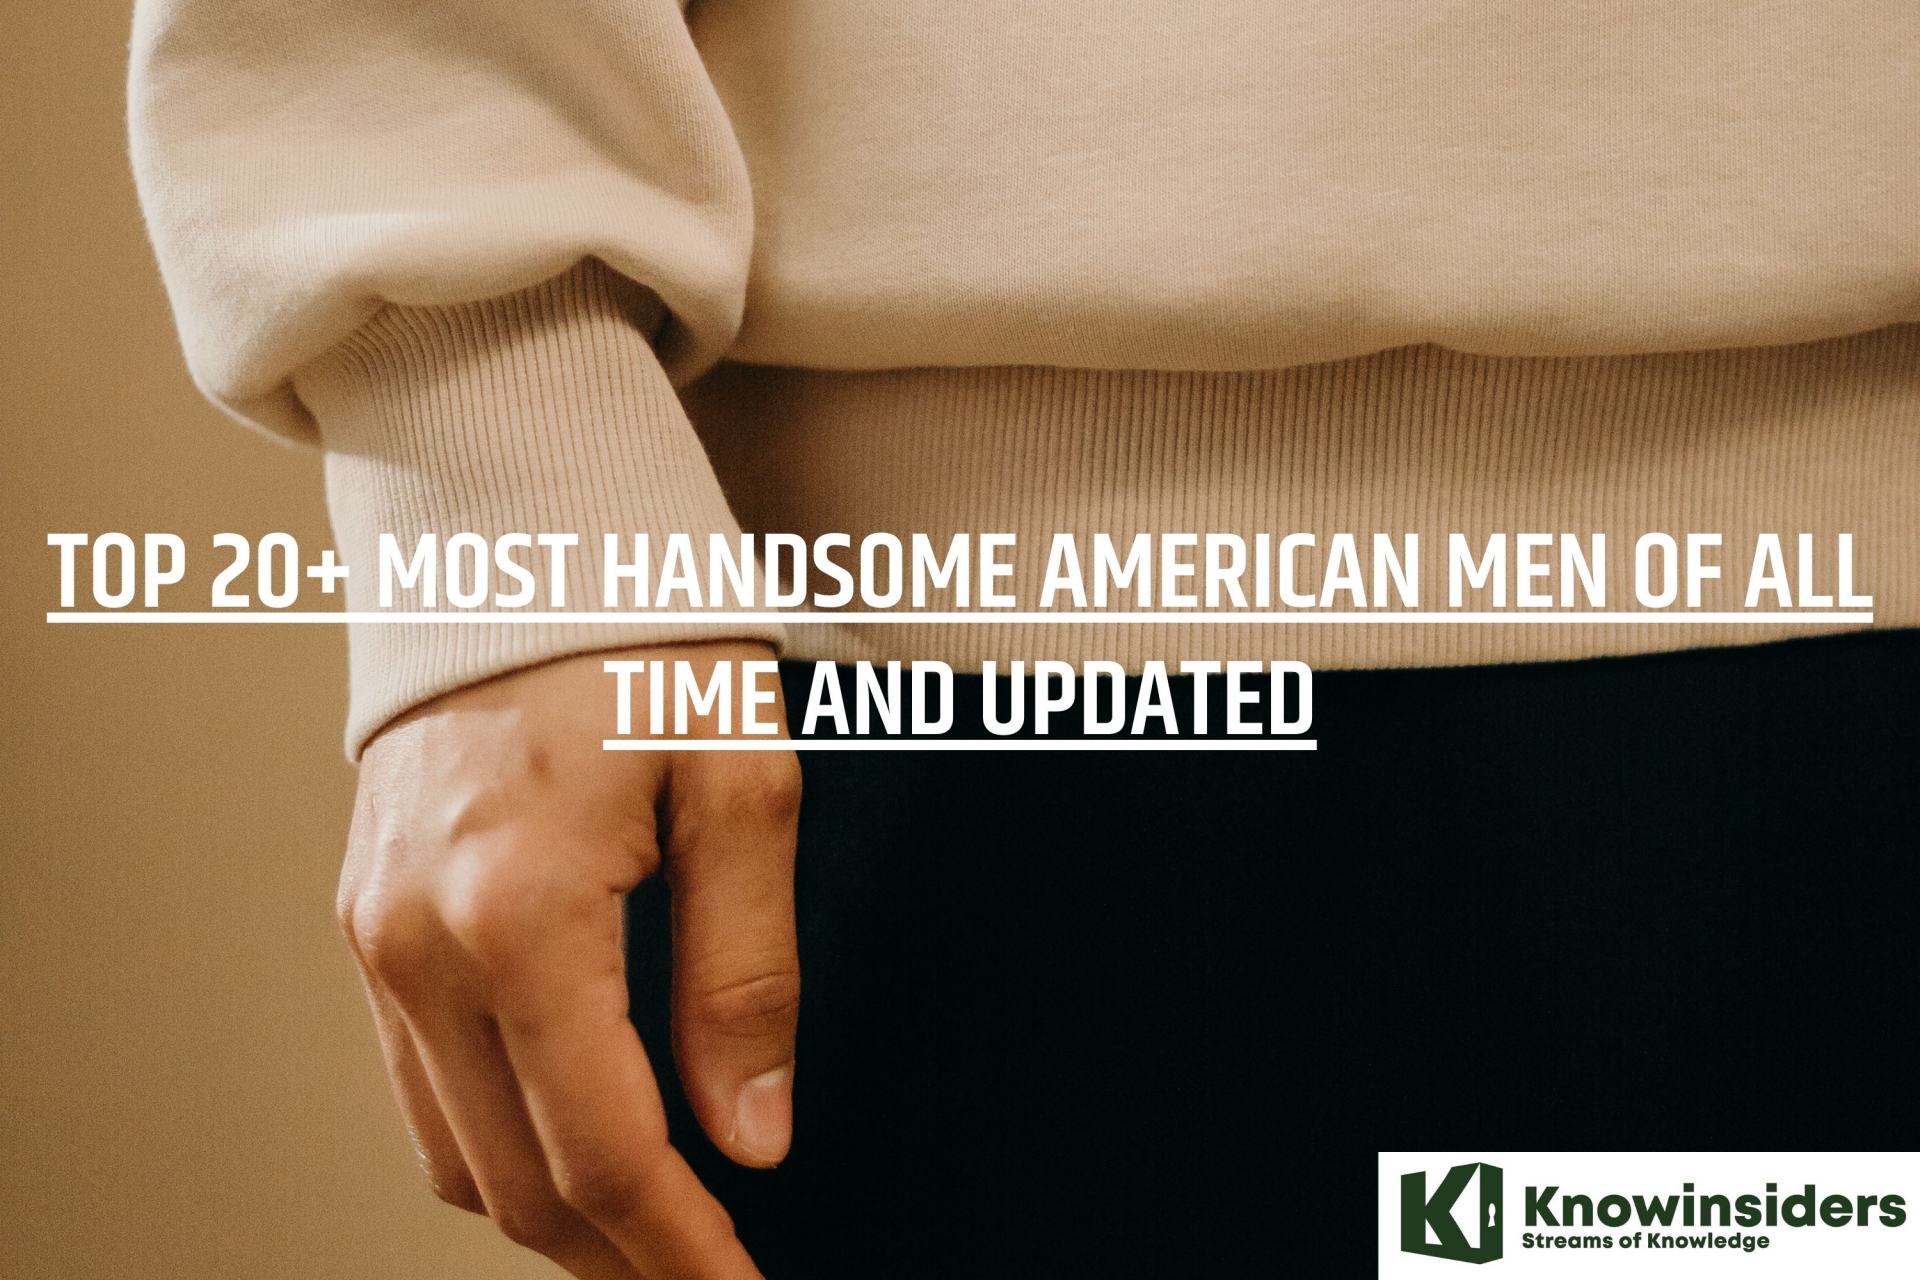 Top 20+ Most Handsome American Men of All time and Updated